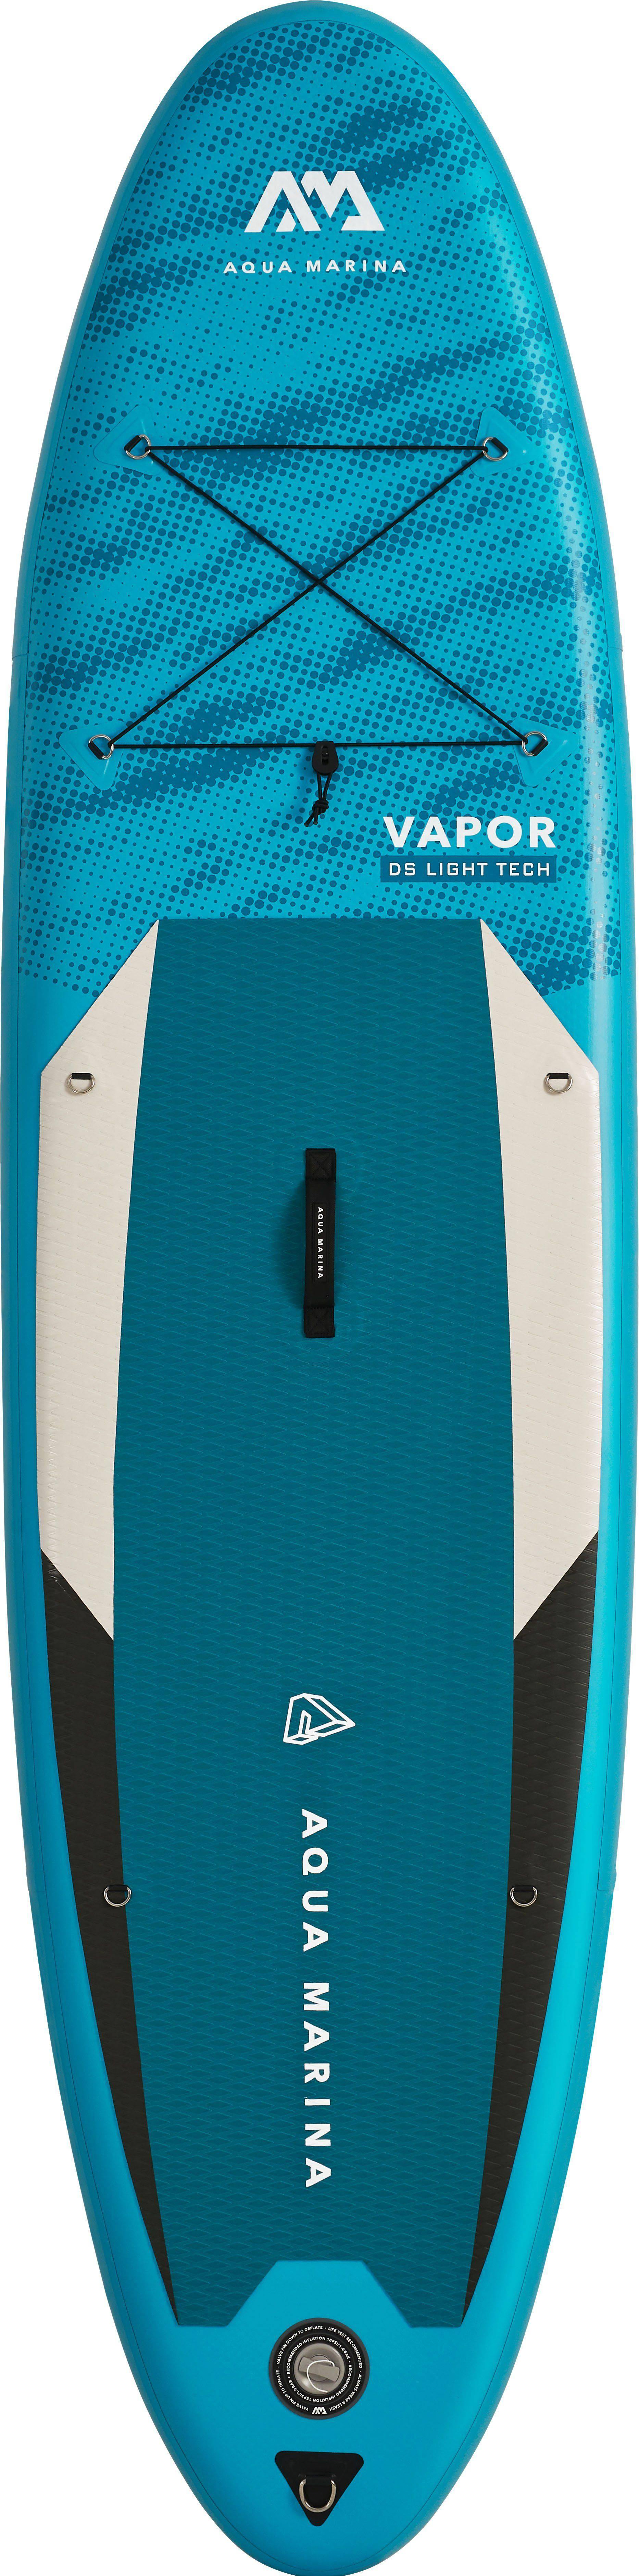 Vapor All-Around iSUP Paddle Board - DTI Direct Canada